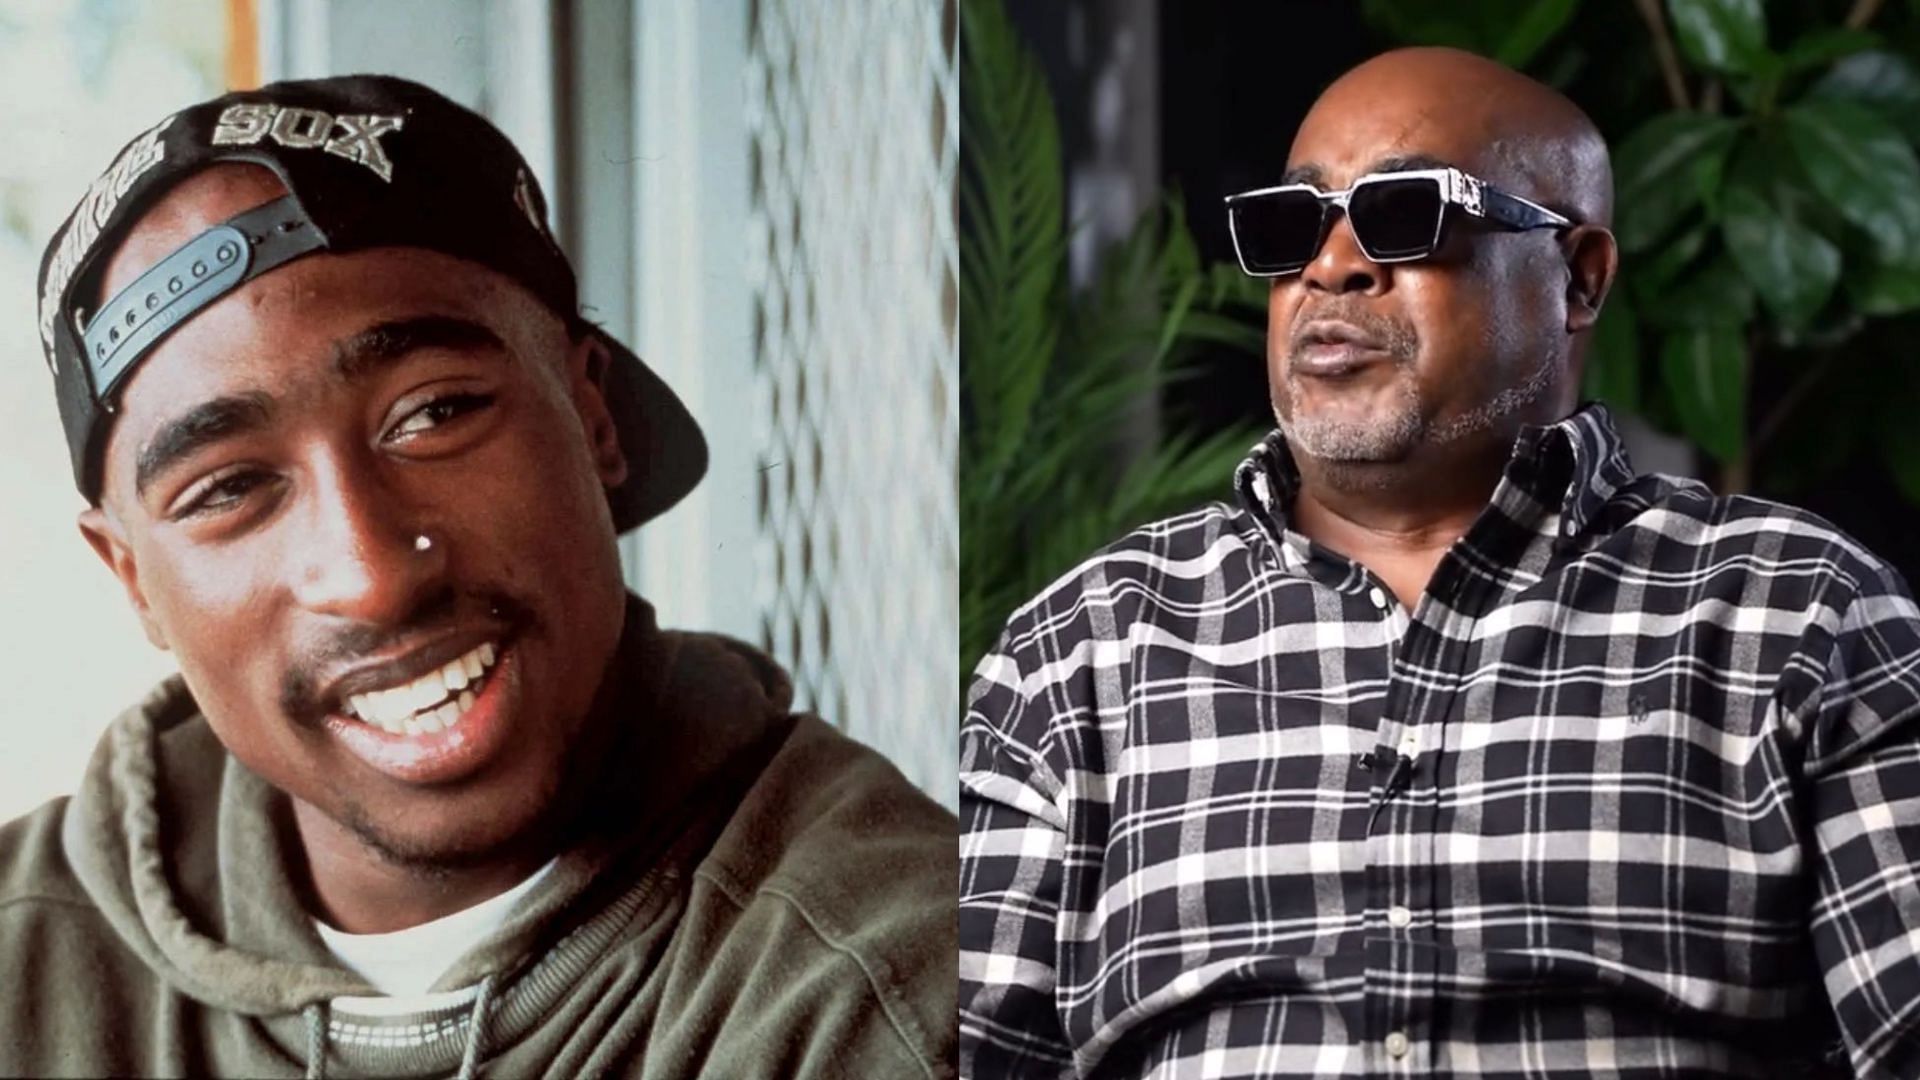 Keefe D is indicted for the murder of Tupac Shakur. (Images via Twitter/@piersmorgan &amp; @DisheveledNig94)